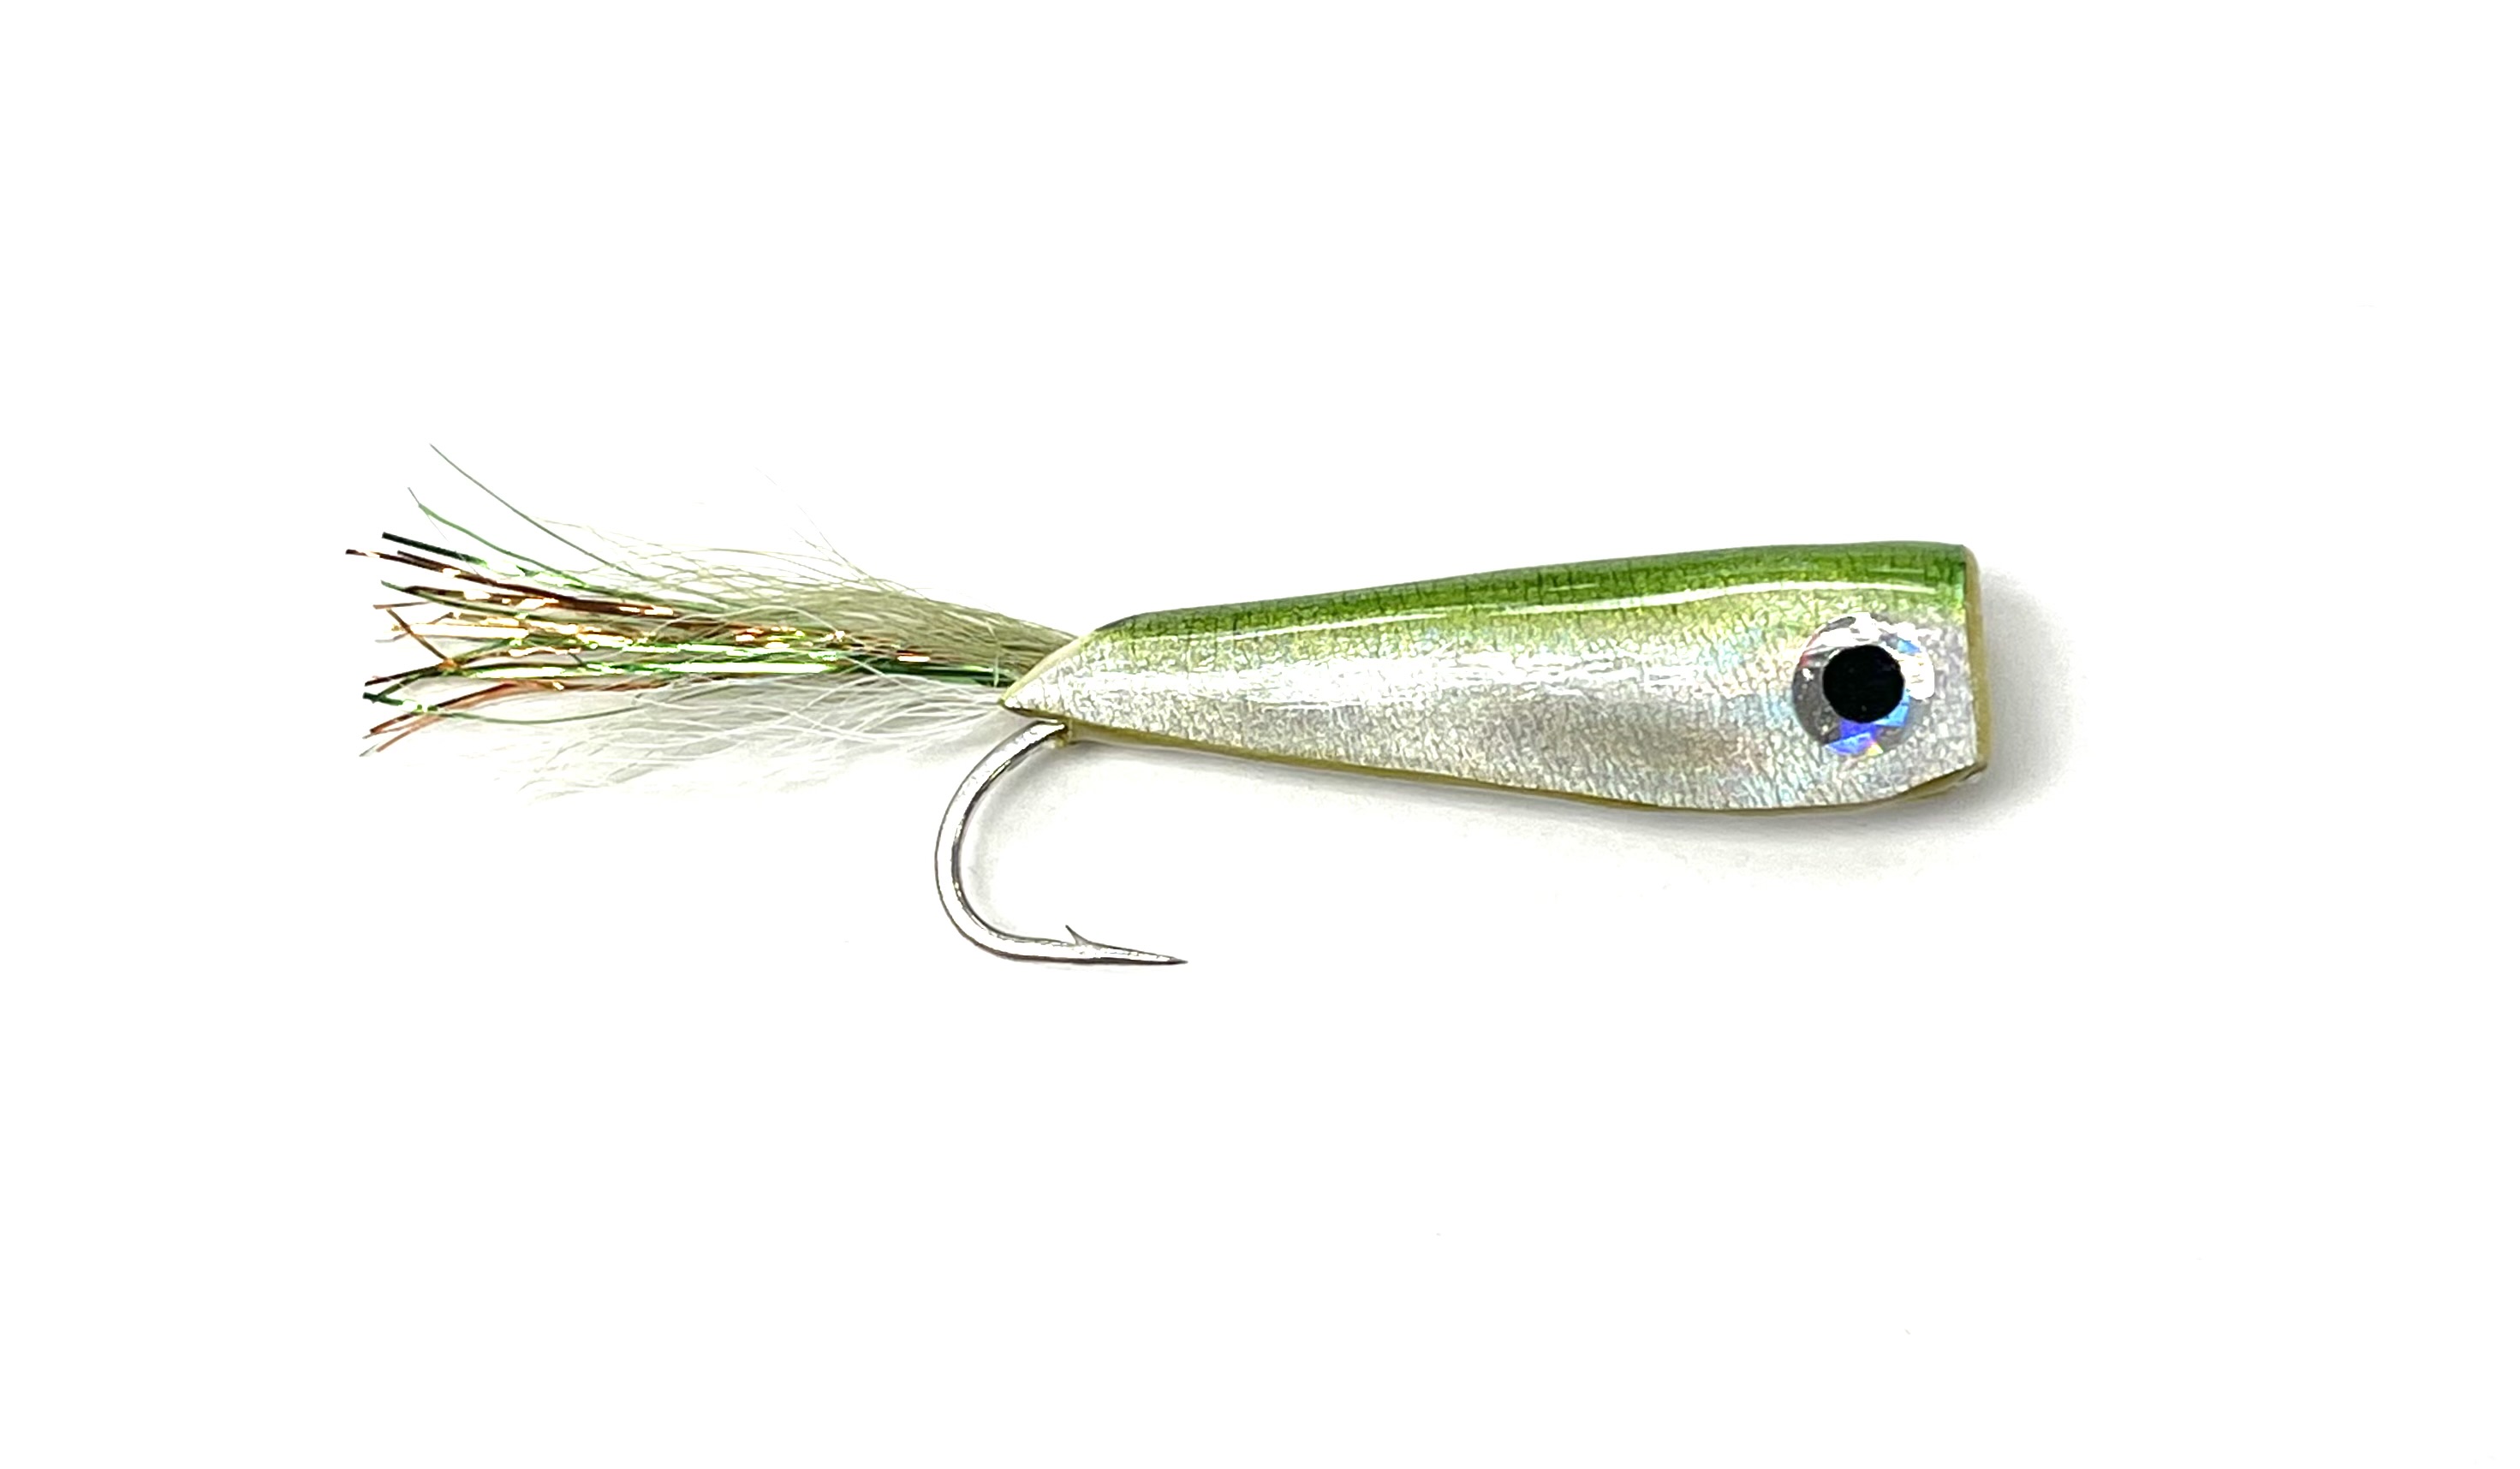 FAD Crease Fly - Olive Back - Size 1/0